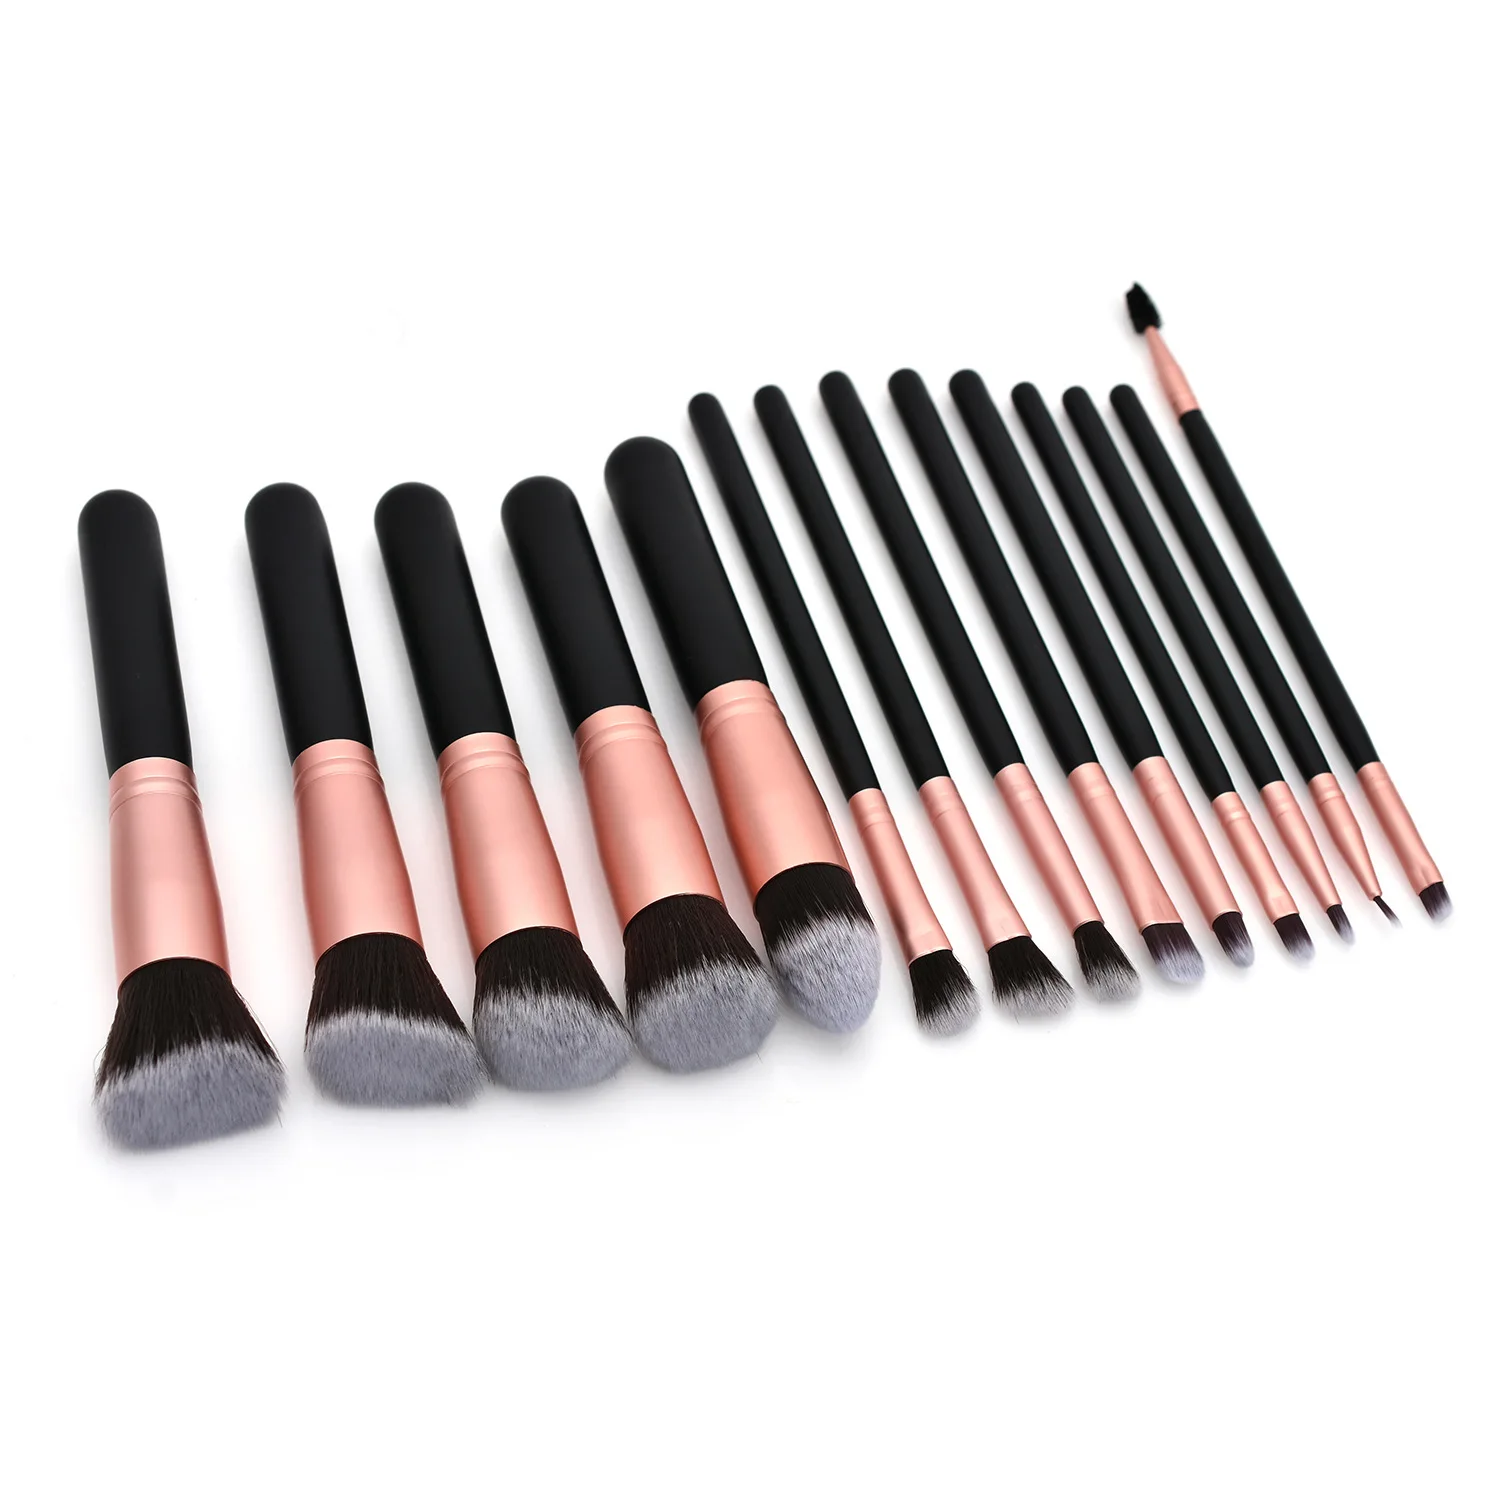 

2021 Amazon Best Seller BS-MALL Rose Gold Synthetic Makeup Brushes 14pcs Makeup Brush Set Private Label Make Up brushes